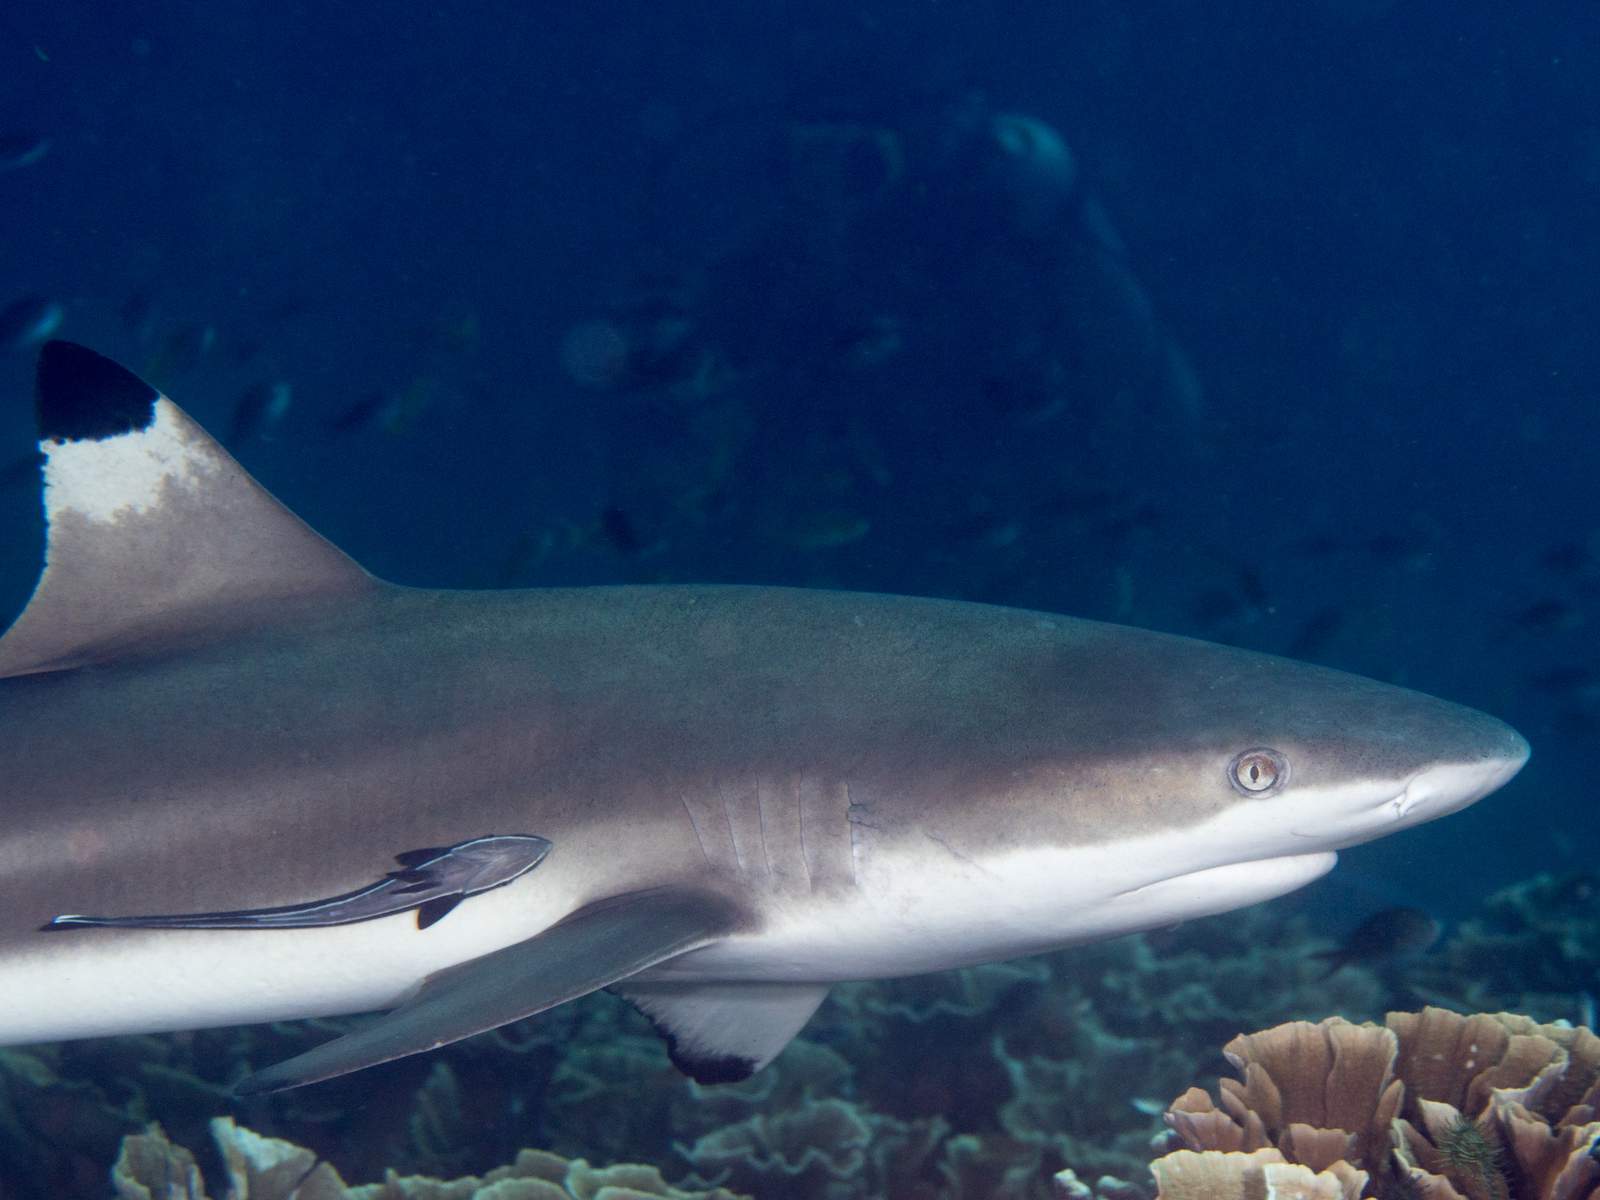 Florida continues to be shark bite capital of the world with 21 attacks in 2019